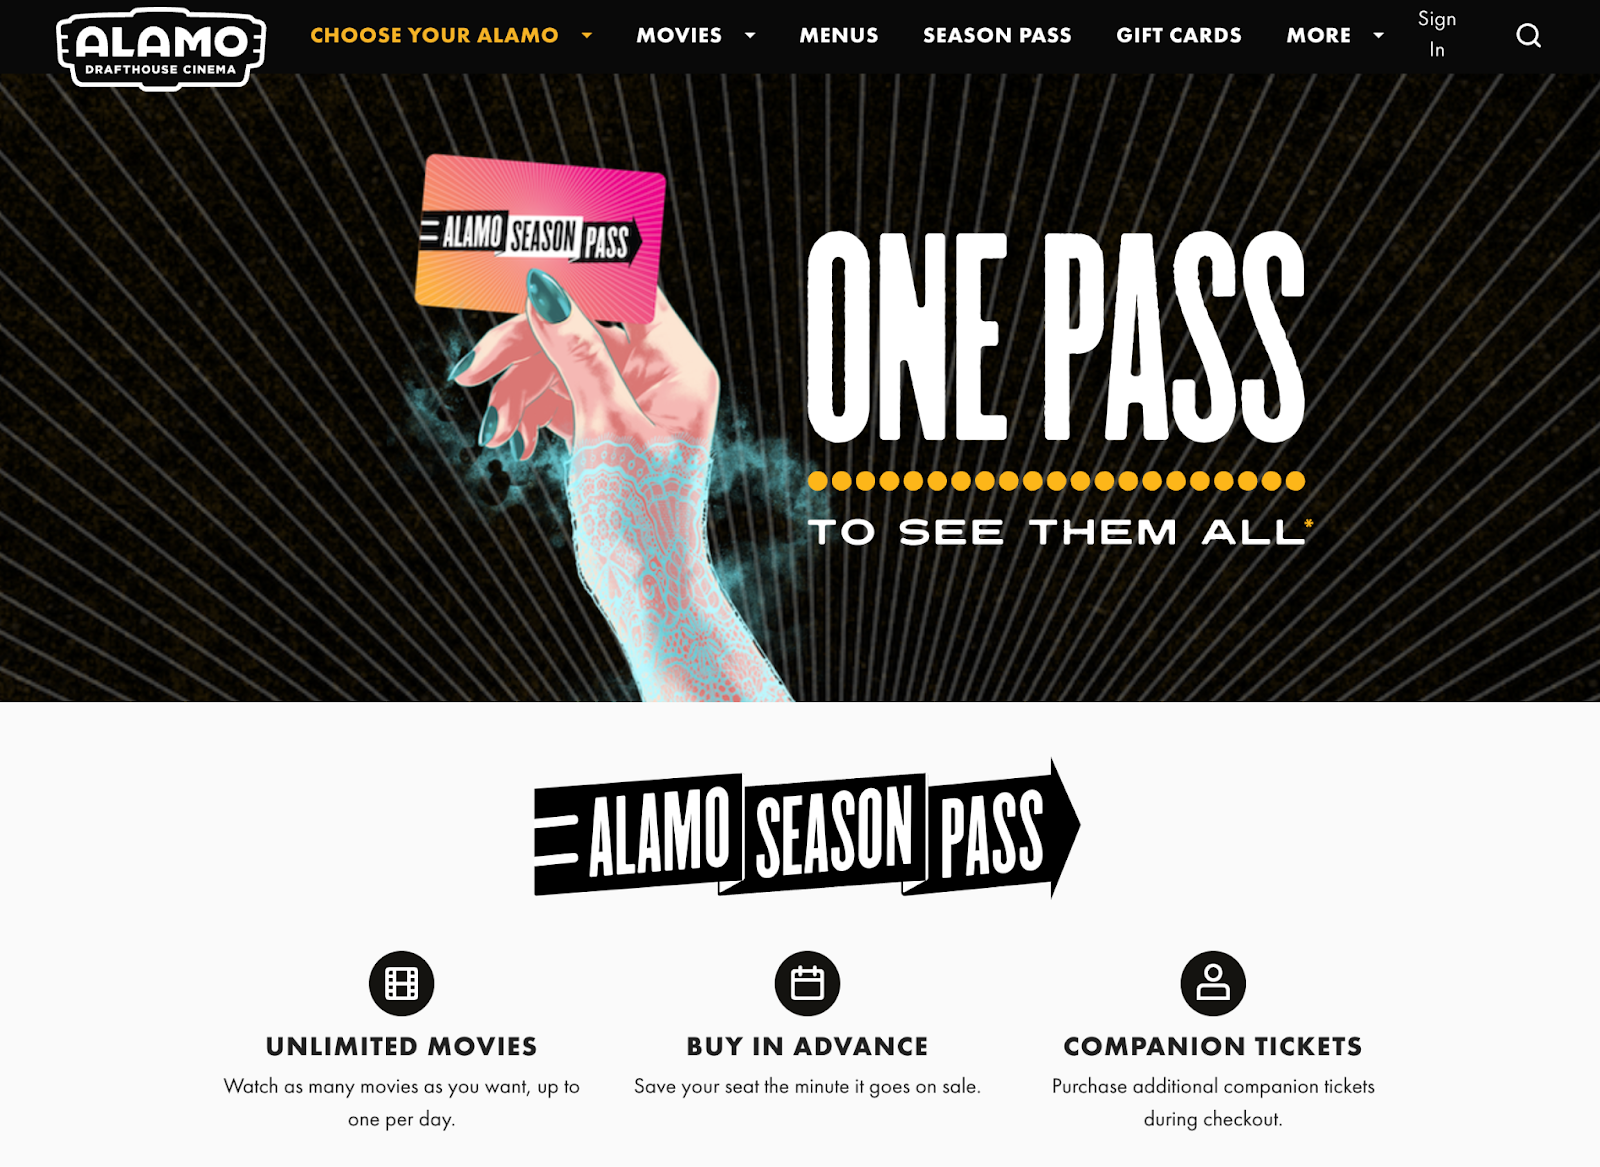 Alamo Drafthouse Cinema offers different pricing tiers based on VIP membership